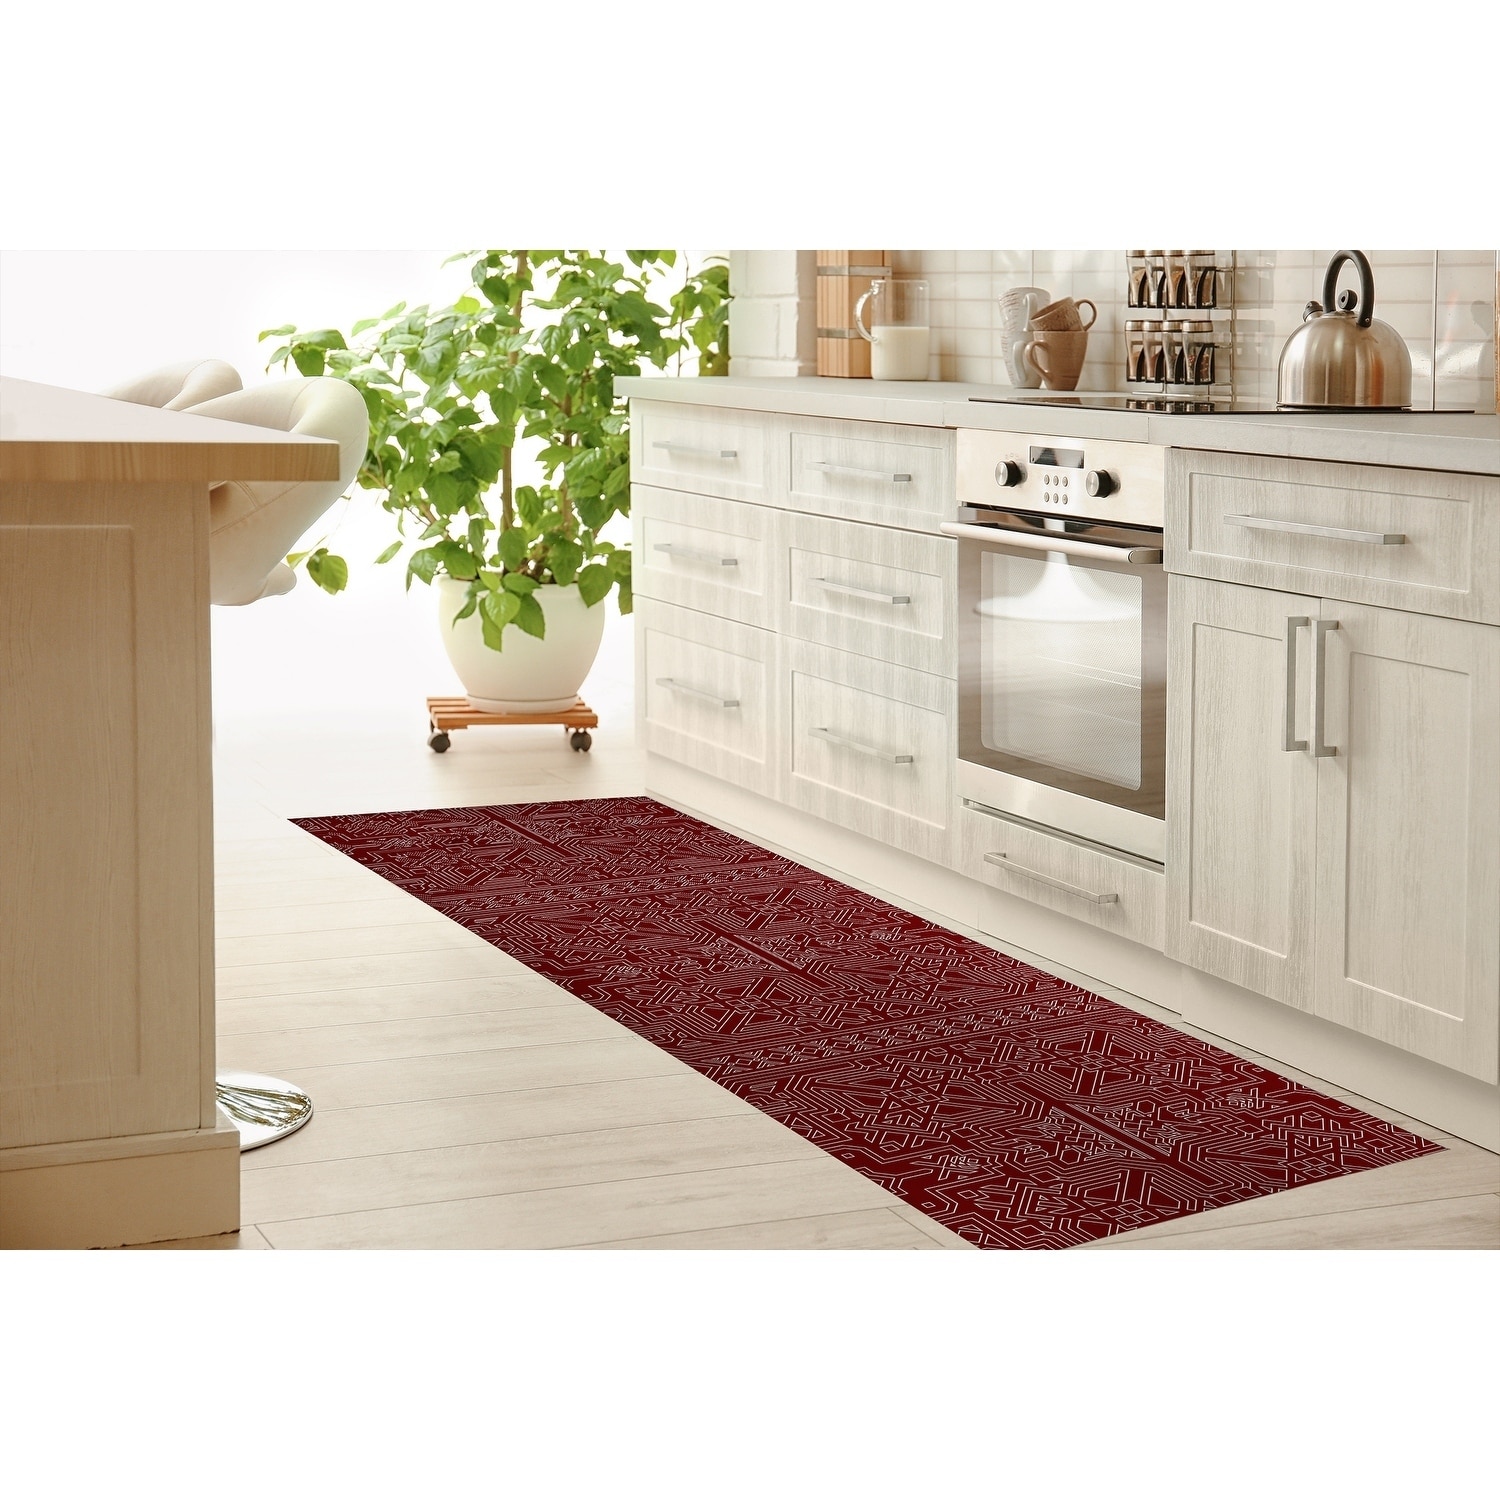 Provence Cushioned Kitchen Mat  Cushioned kitchen mats, Kitchen mat, Kitchen  mats floor